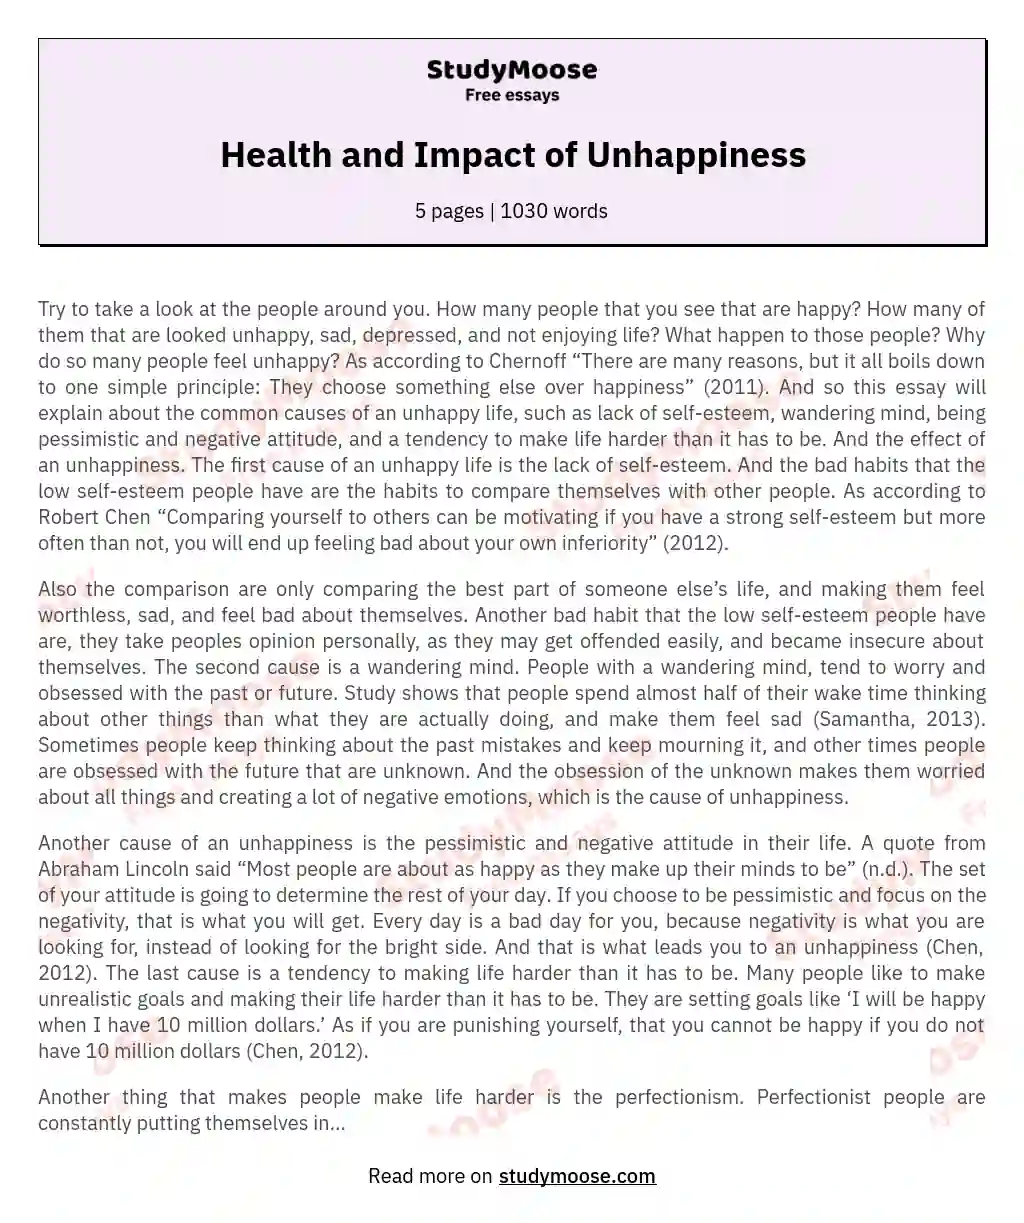 Health and Impact of Unhappiness essay